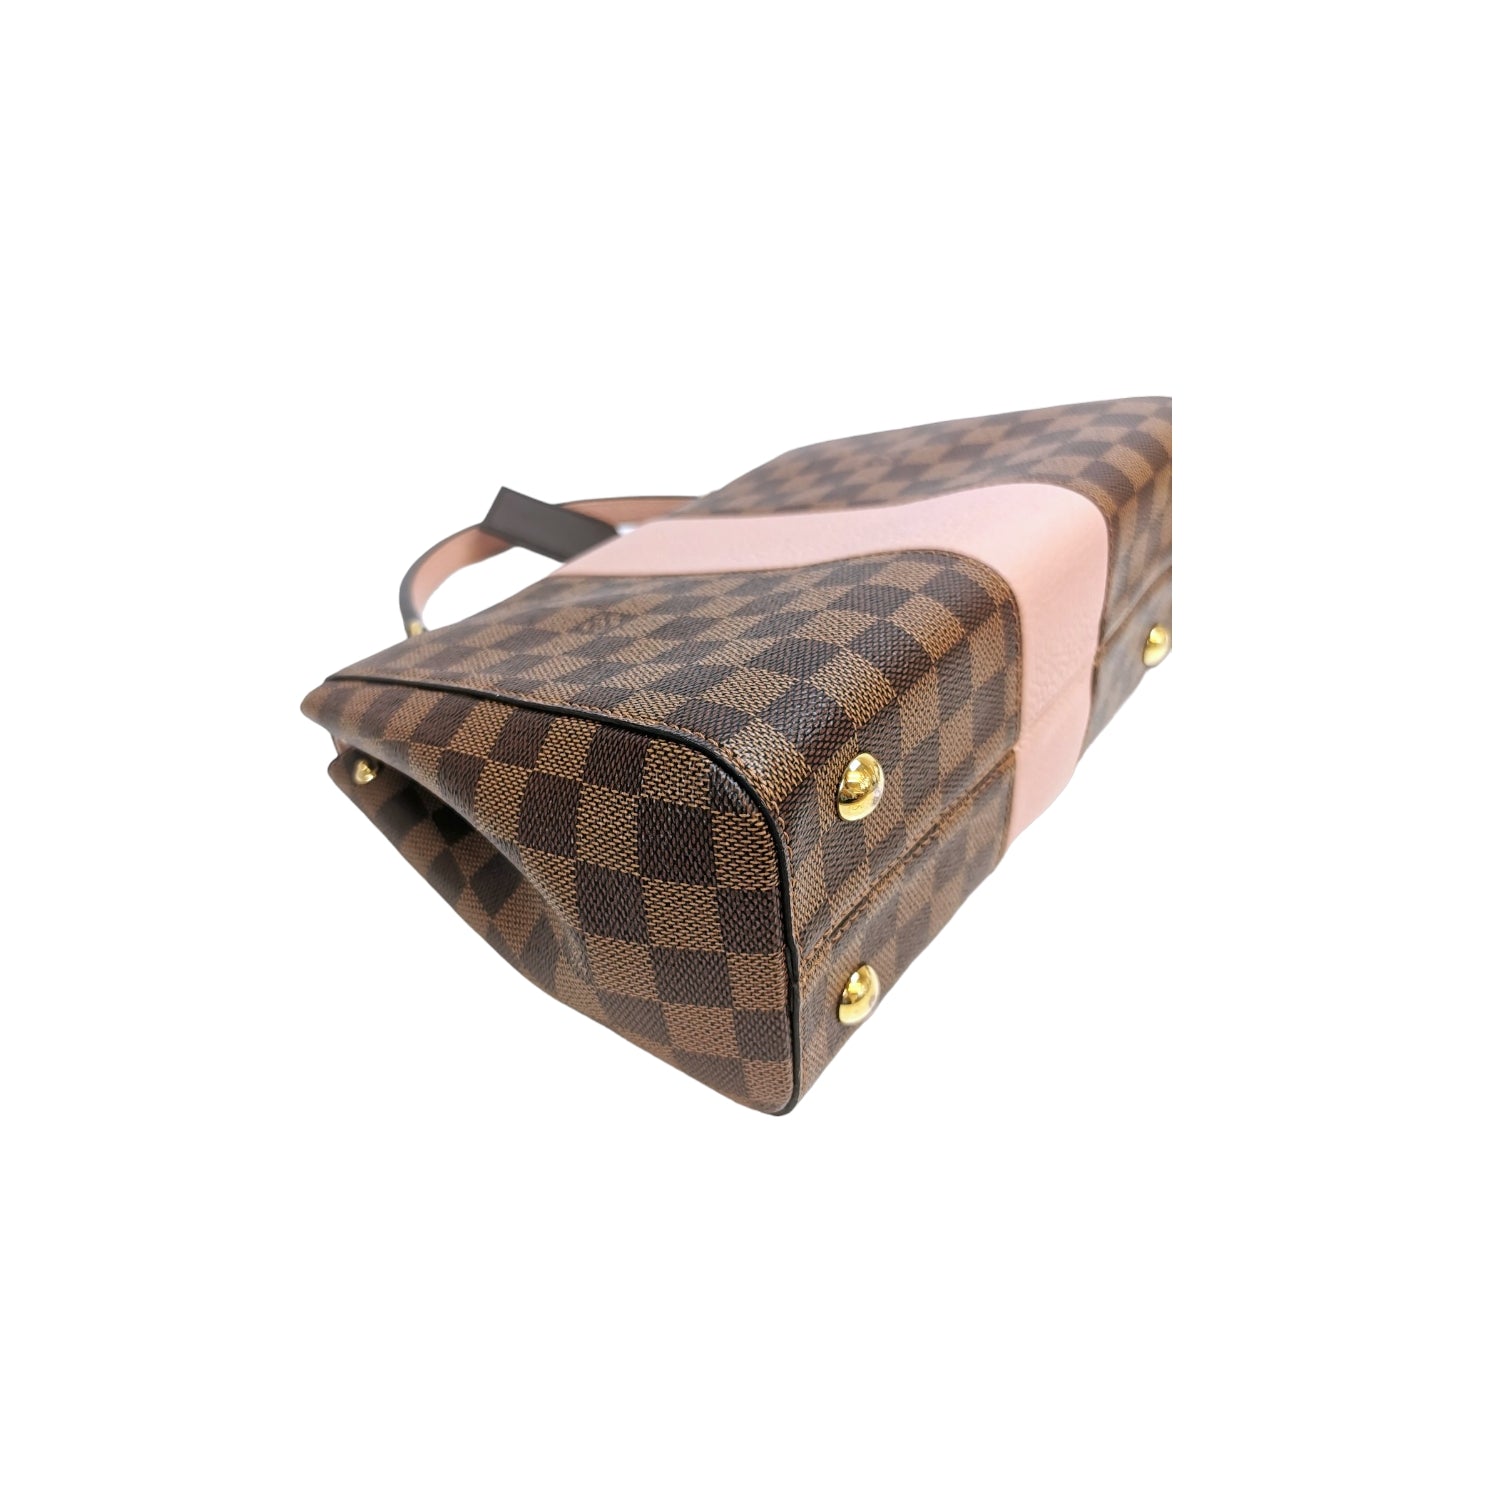 Louis Vuitton Damier Ebene with Pink Leather Jersey Tote Bag